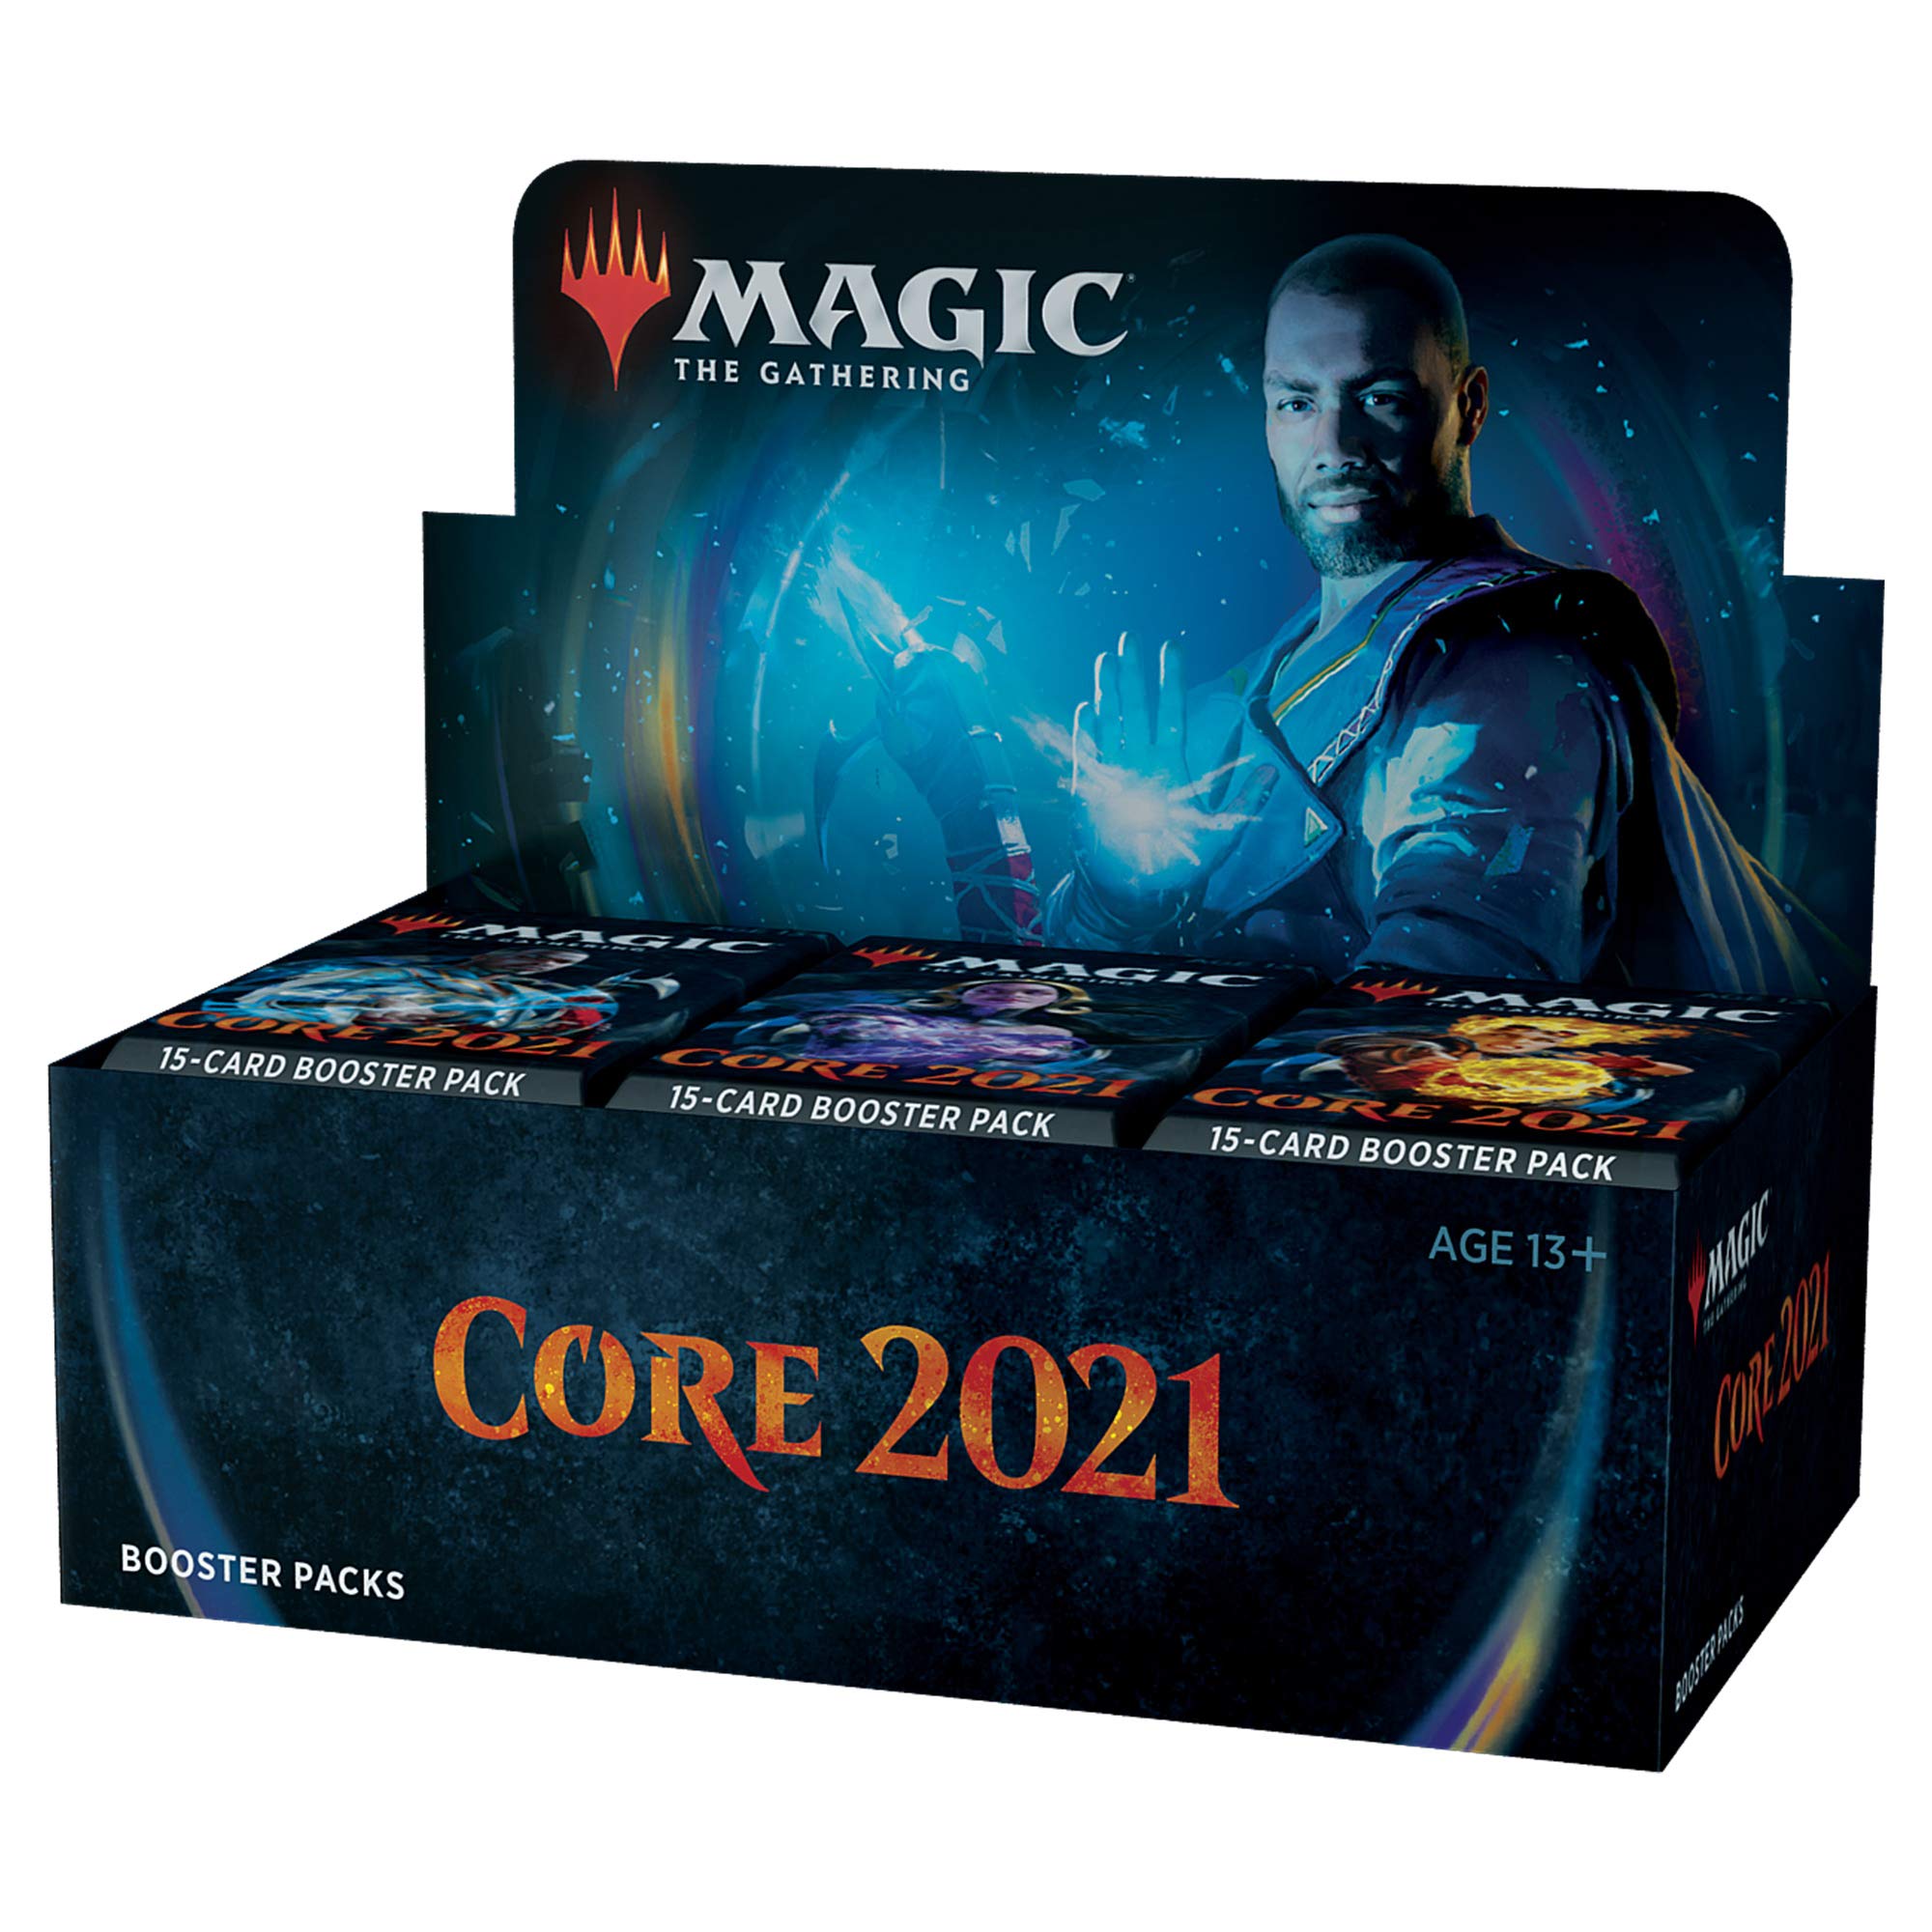 Magic: The Gathering Core Set 2021 (M21) Draft Booster Box | 36 Booster Packs (540 Cards) | Latest Set